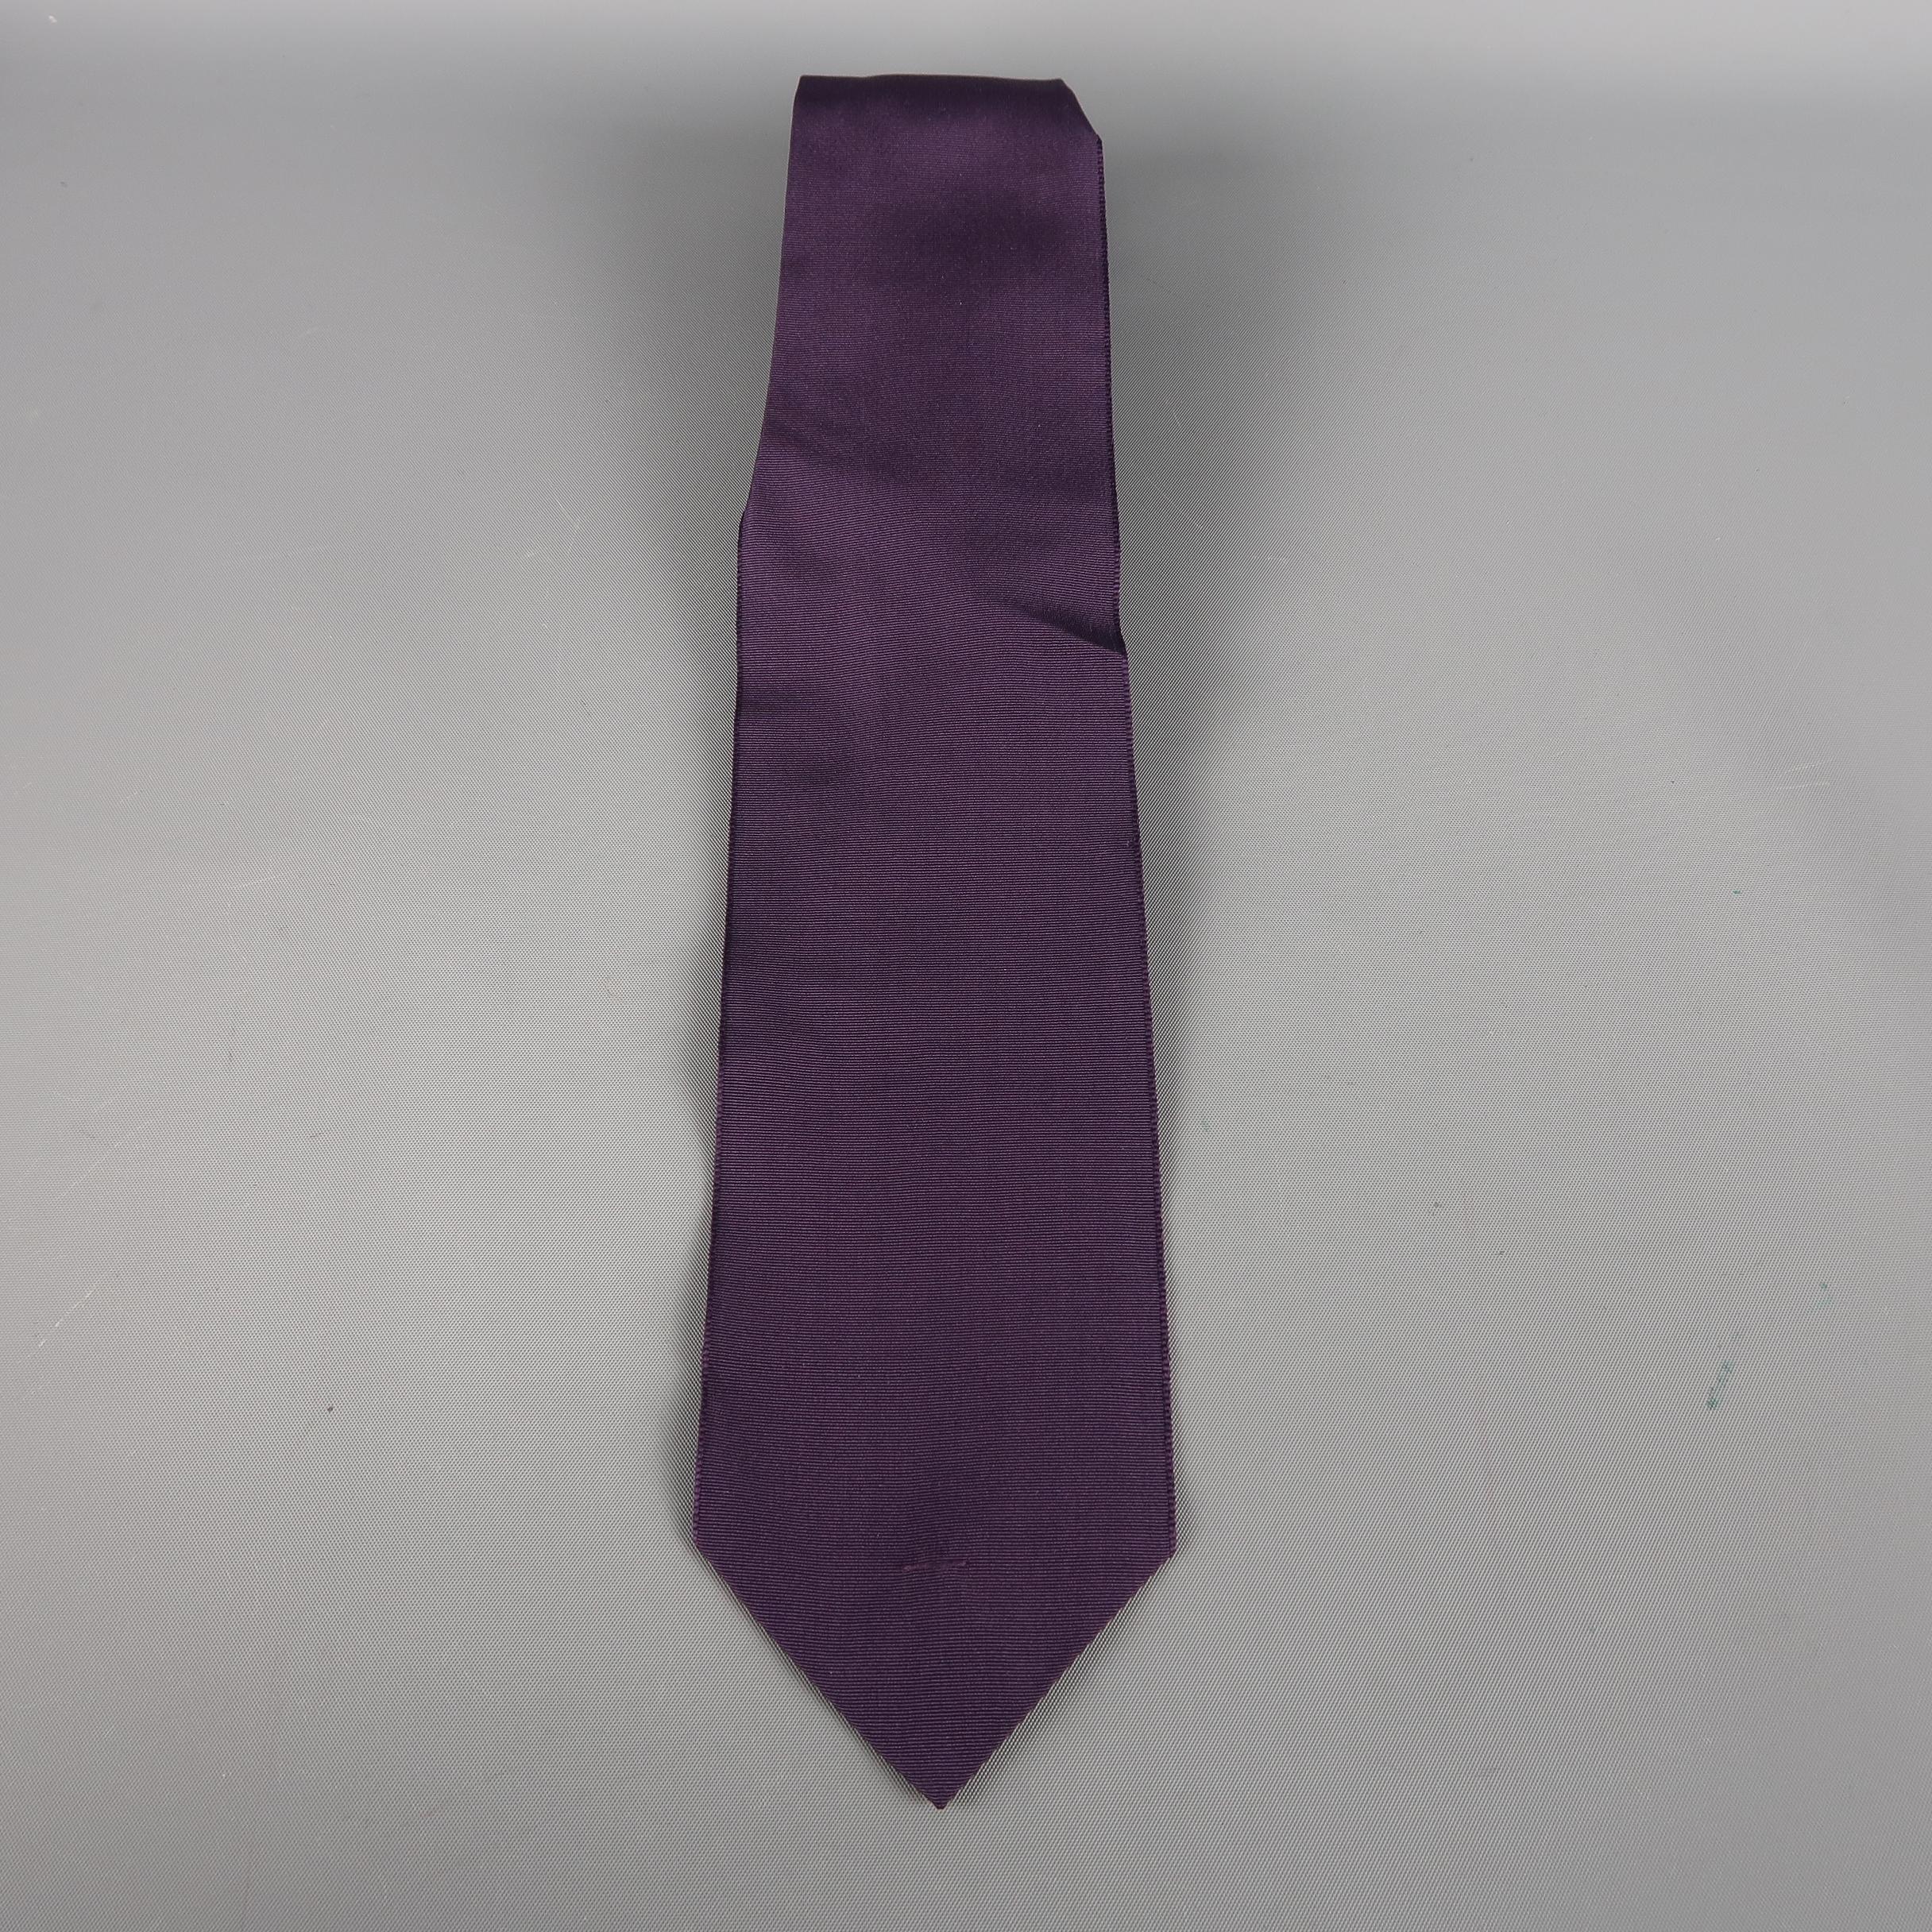 LANVIN tie come in purple and navy tones in solid silk material. Made in France.
 
Excellent Pre-Owned Condition.
 
Width: 3 in.